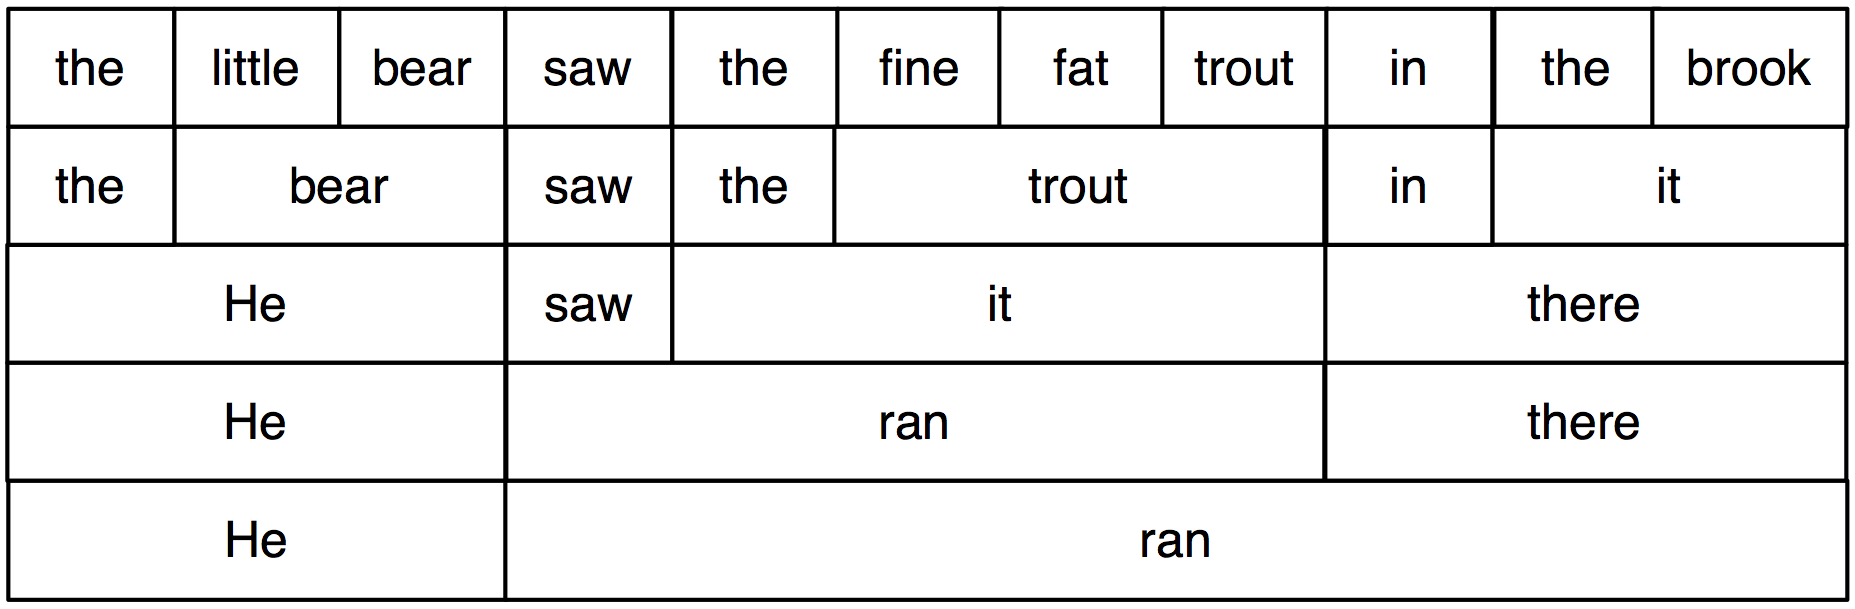 what are two ways to help organize sentences